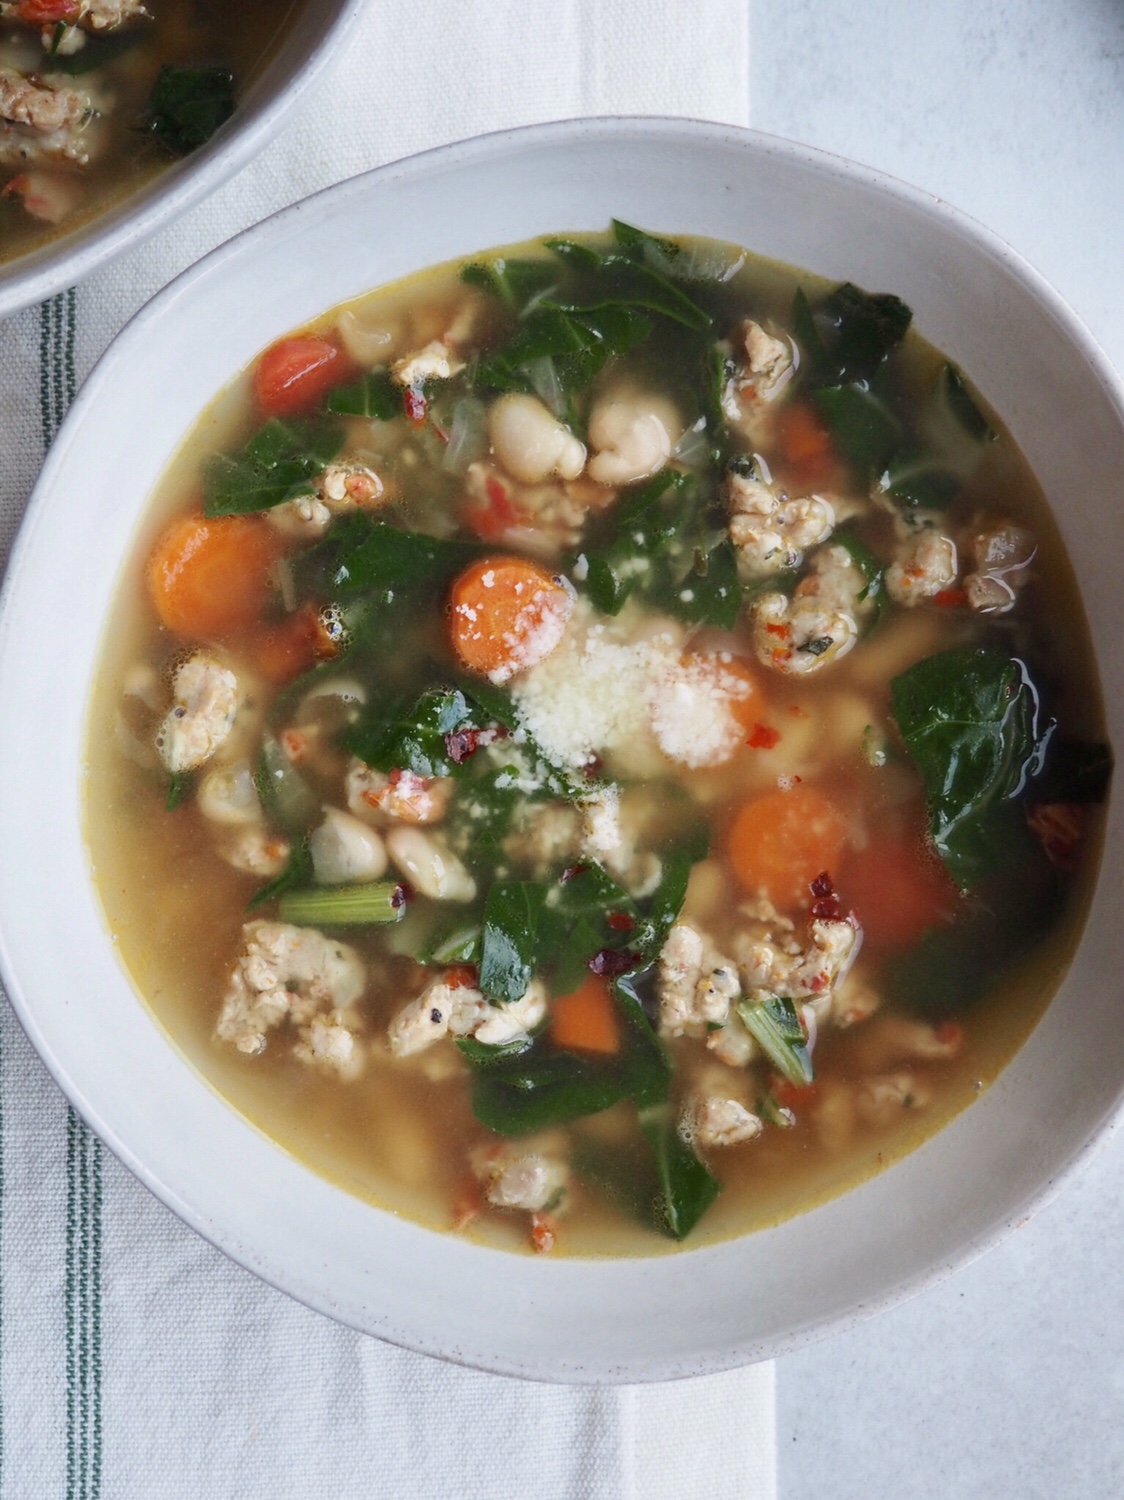 Tuscan-Style Soup with Sausage, Swiss Chard, & Cannellini Beans